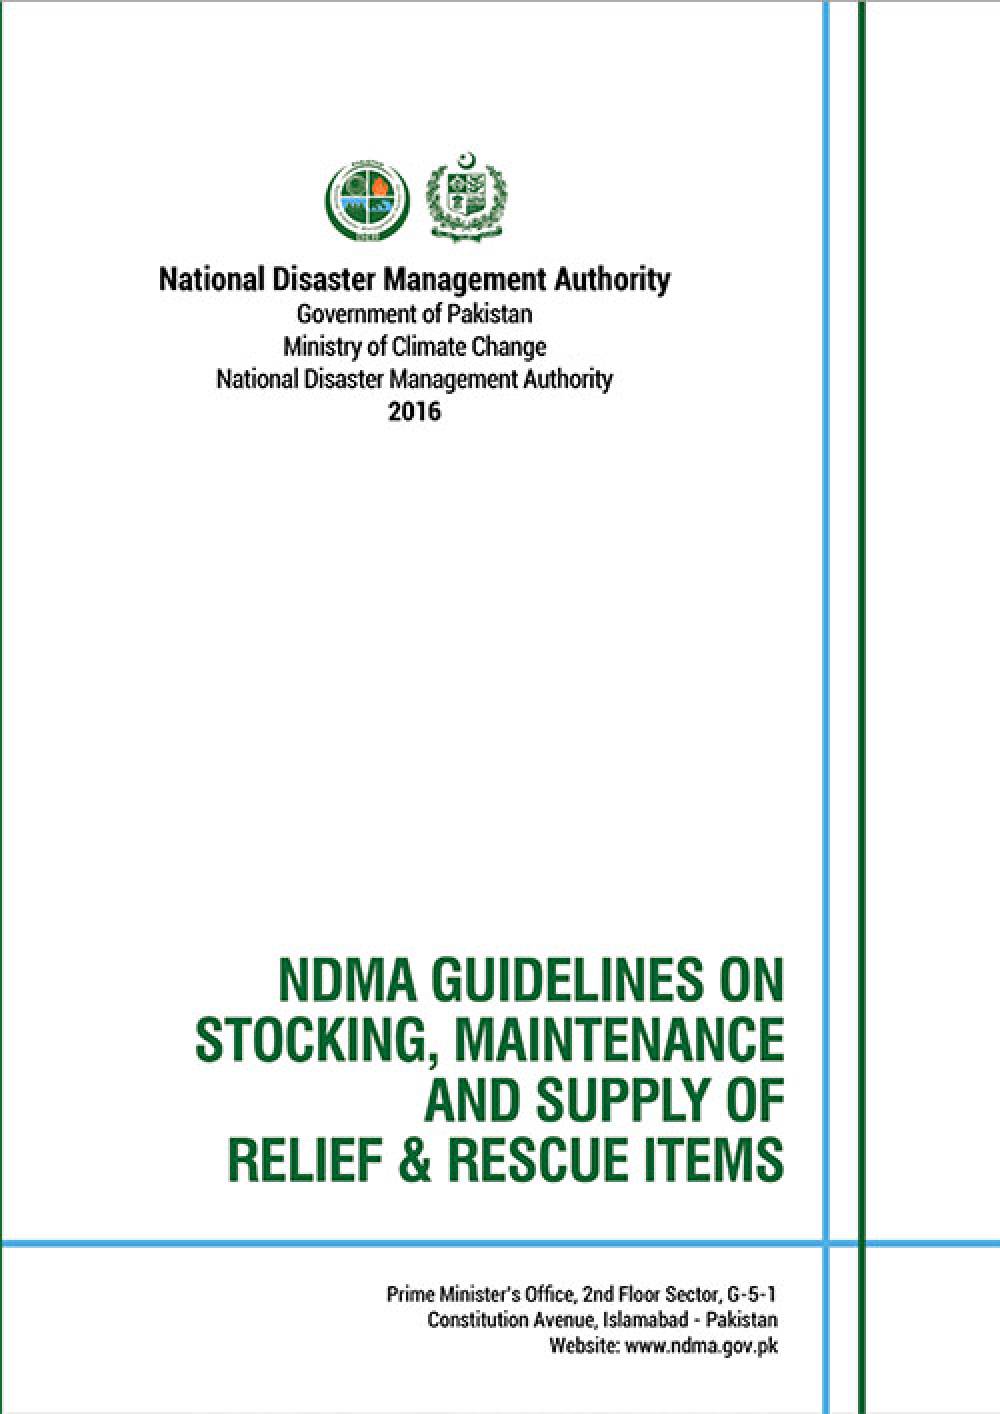 NDMA Guidelines on Stocking, Maintenance and Supply of Relief & Rescue Items